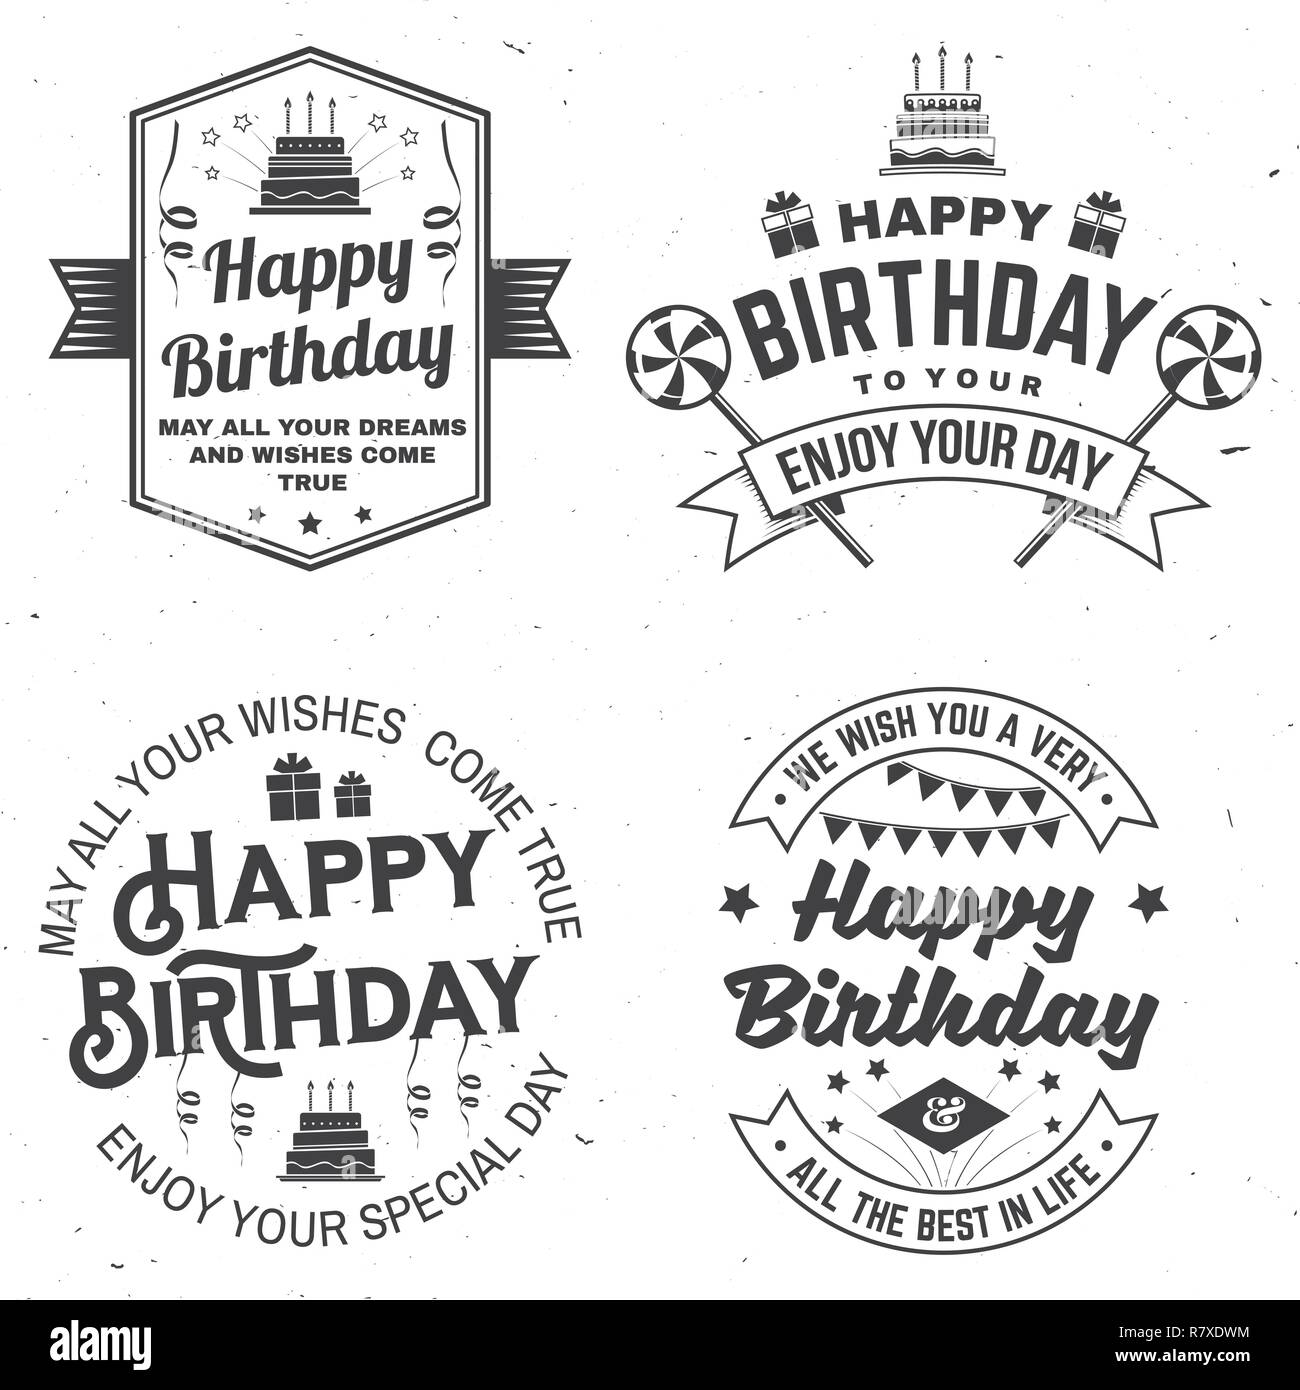 Set of Happy Birthday templates for overlay, badge, sticker, card with bunch of balloons, gifts, serpentine, hat and birthday cake with candles. Vector. Vintage design for birthday celebration Stock Vector